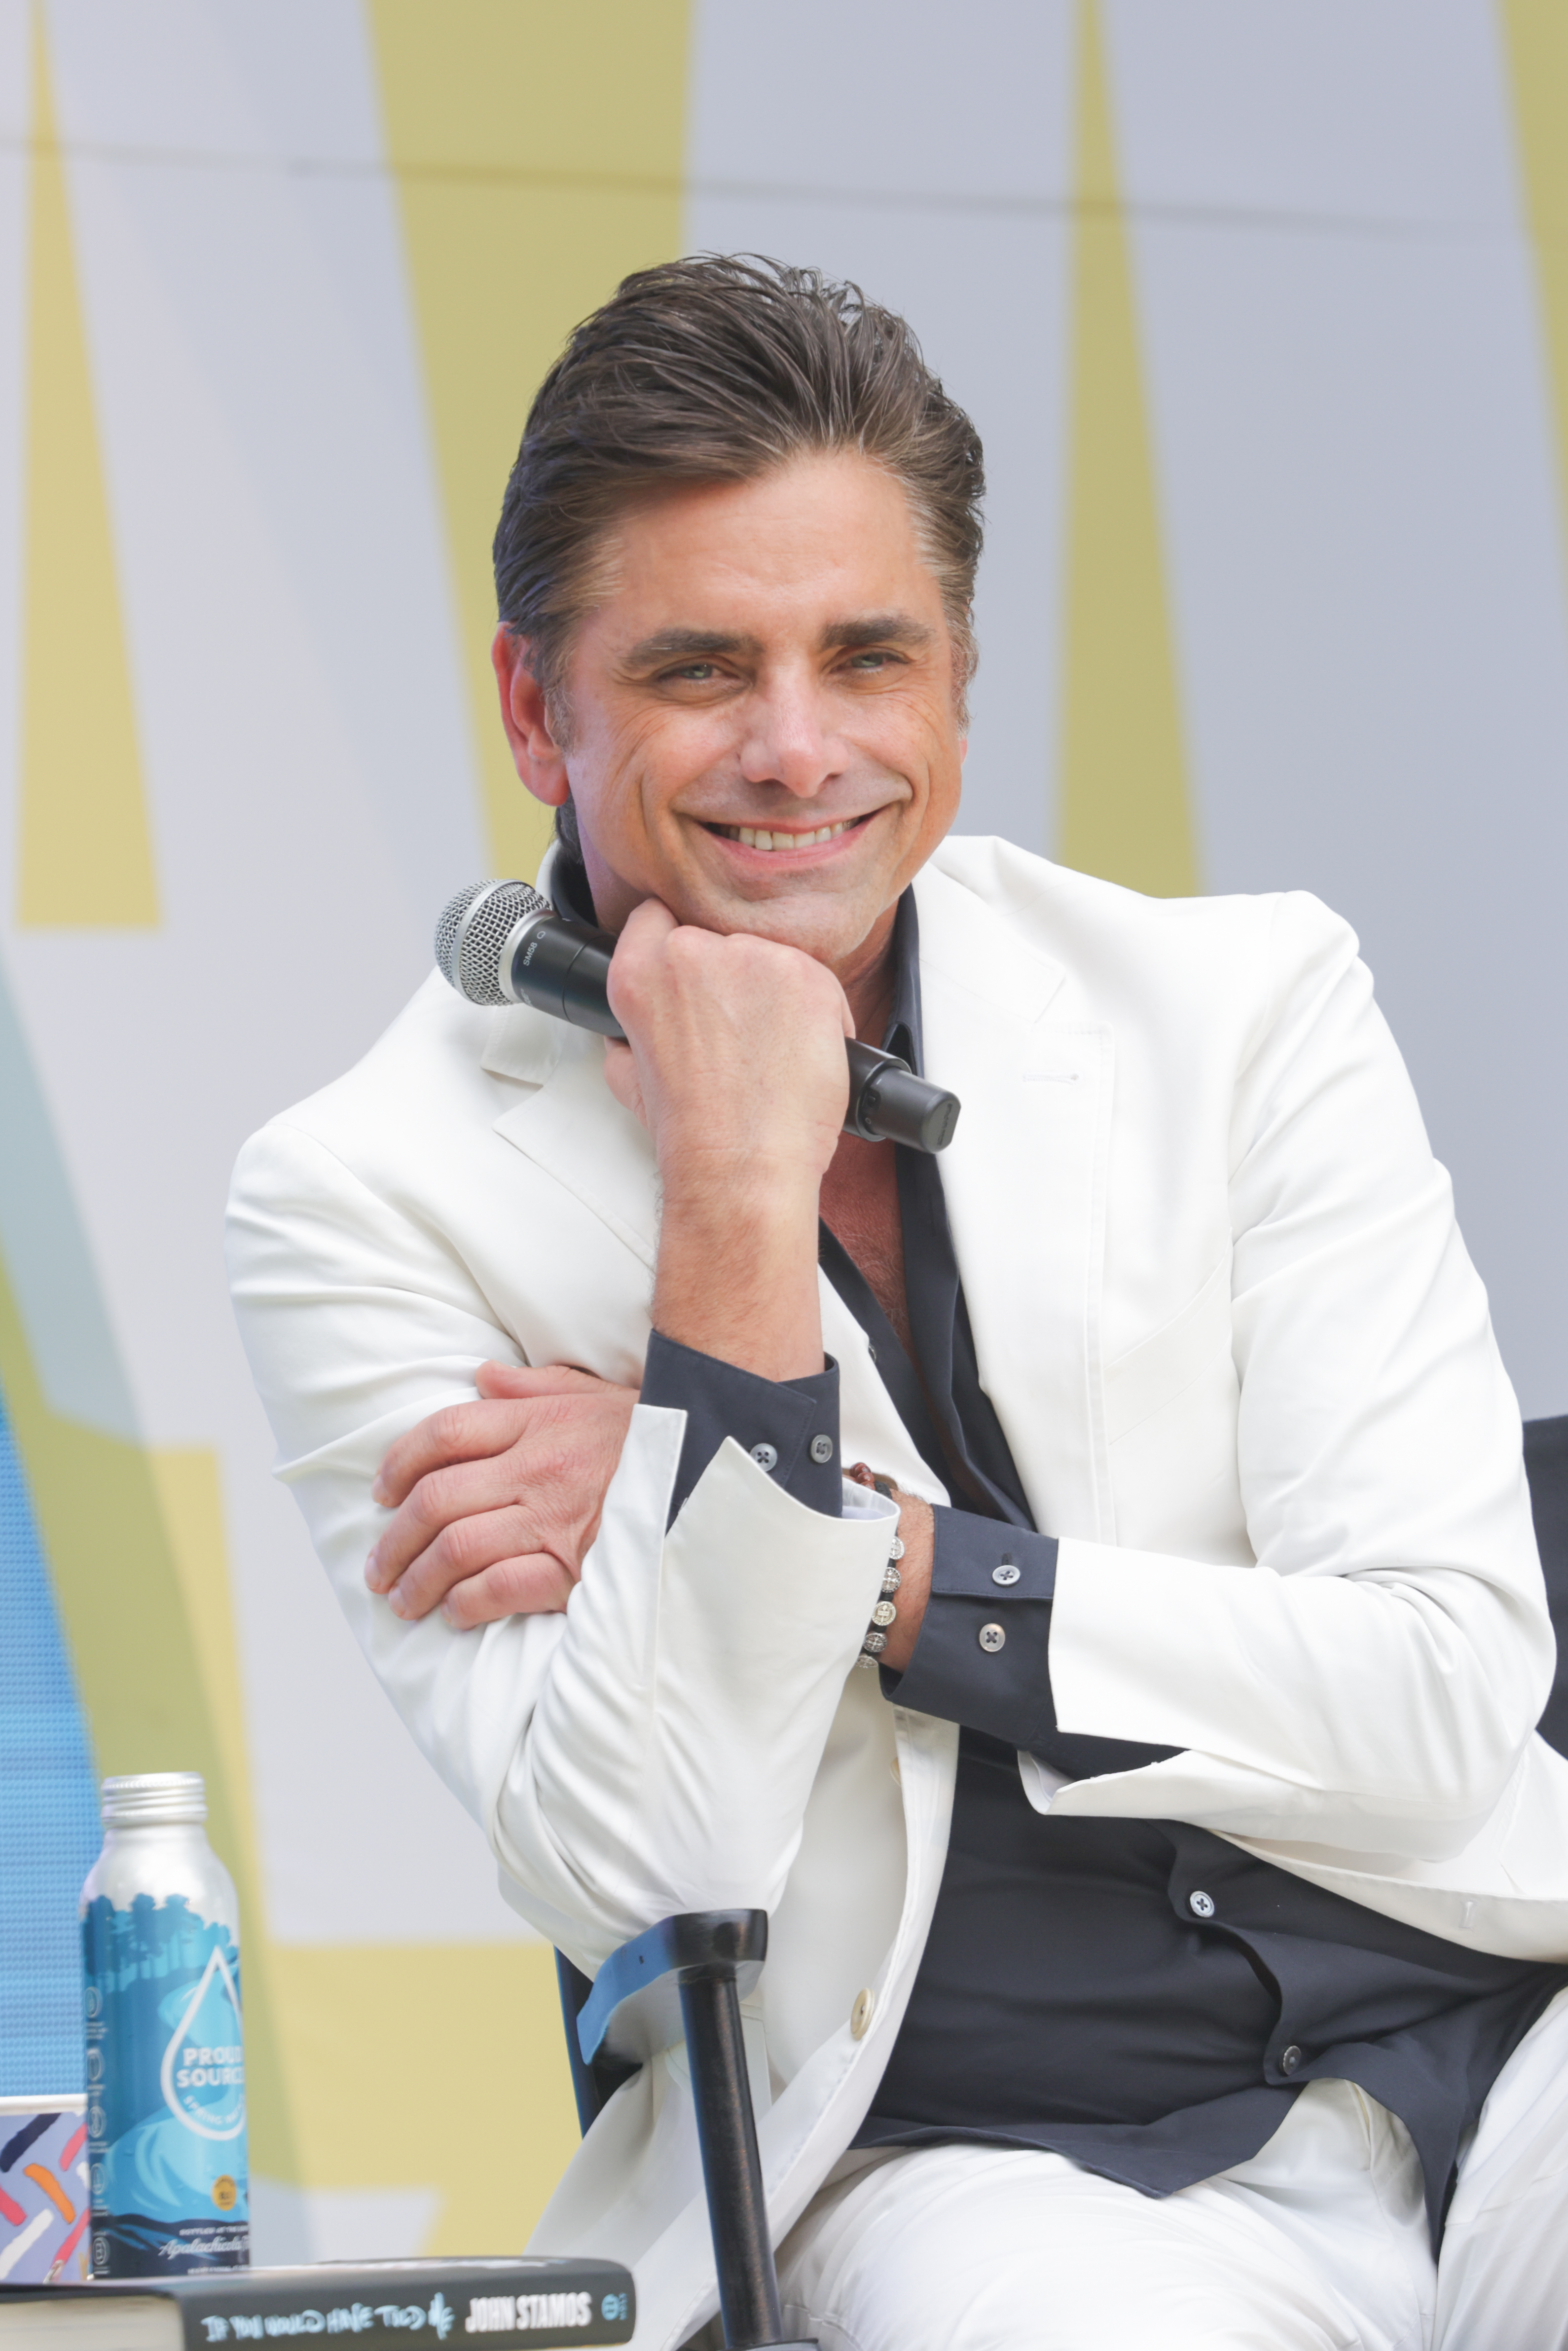 John Stamos wearing a white suit and vest, smiling while holding a microphone at an outdoor event